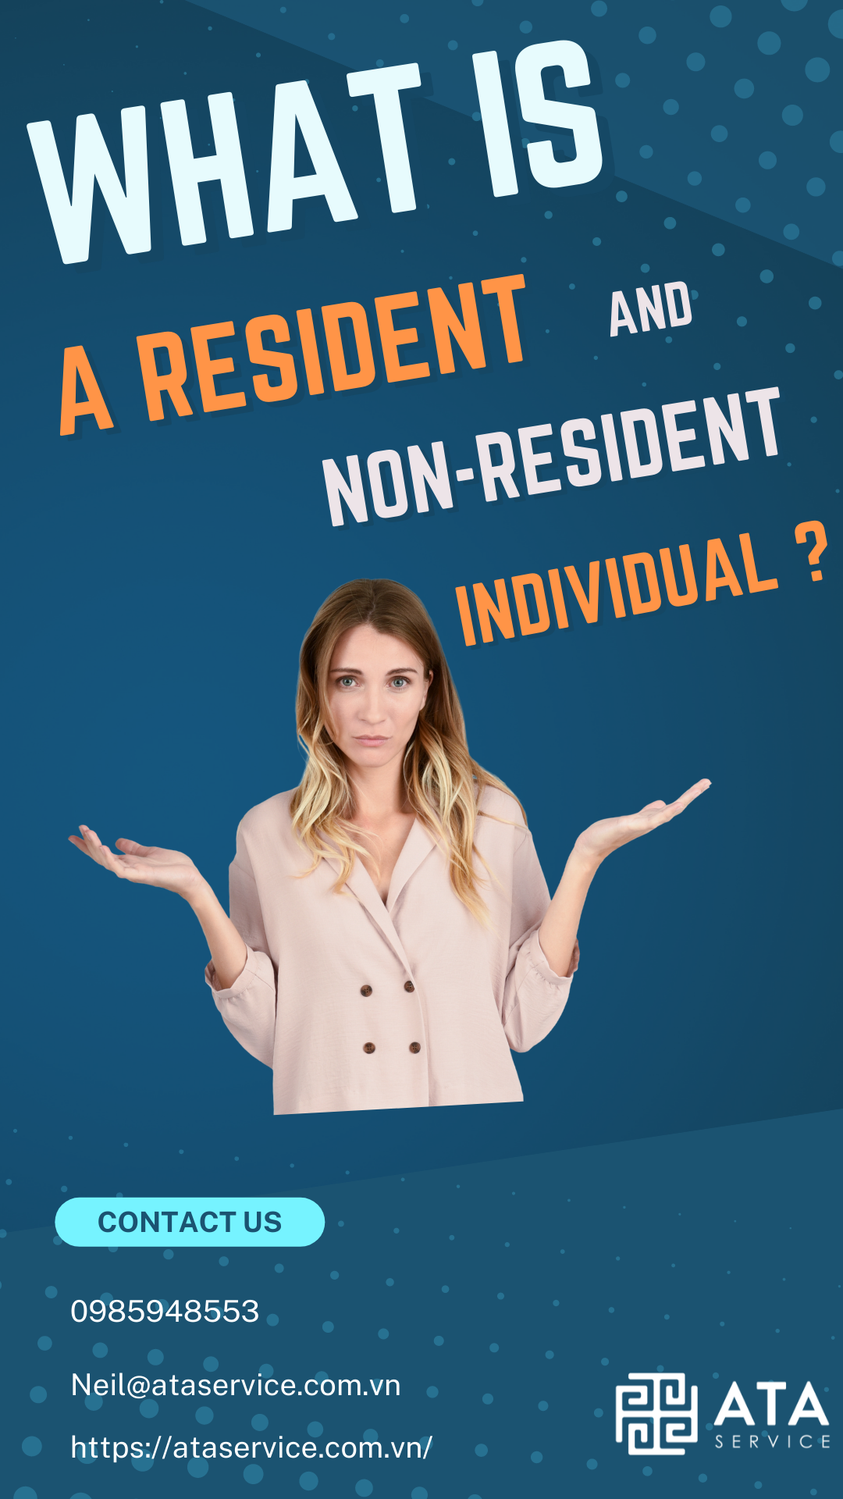 WHAT IS A RESIDENT AND NON-RESIDENT INDIVIDUAL?